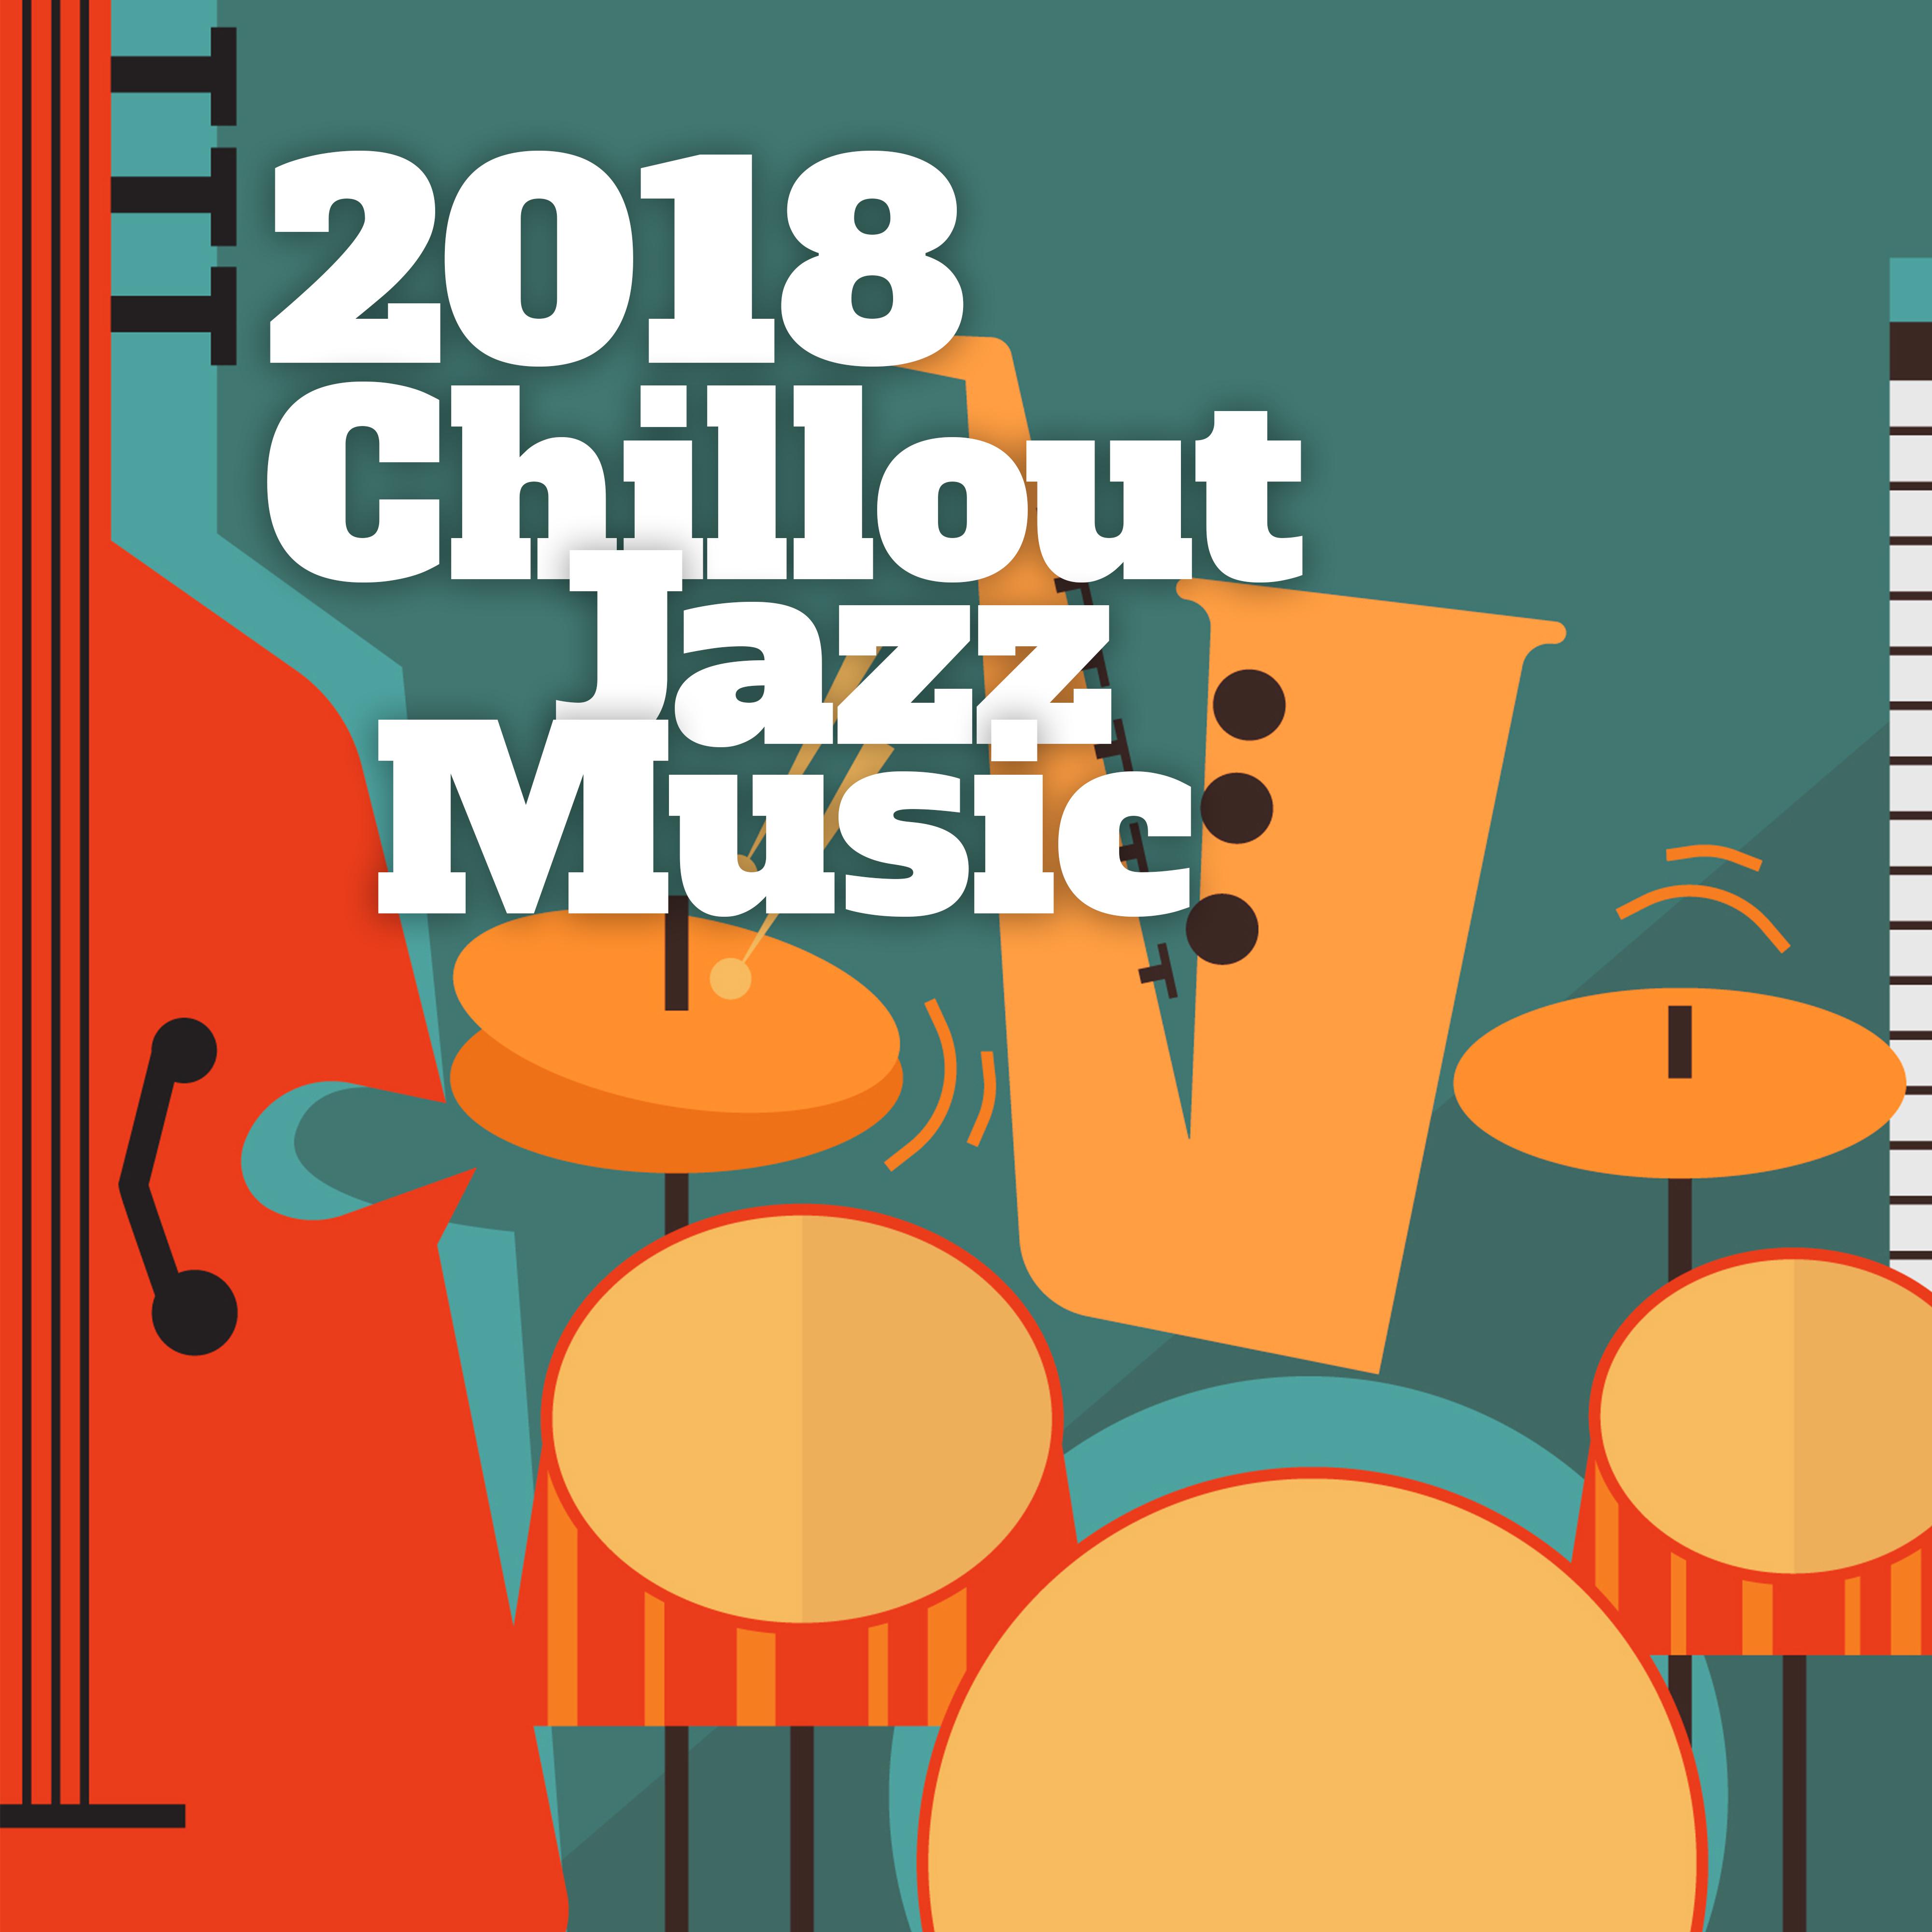 2018 Chillout Jazz Music